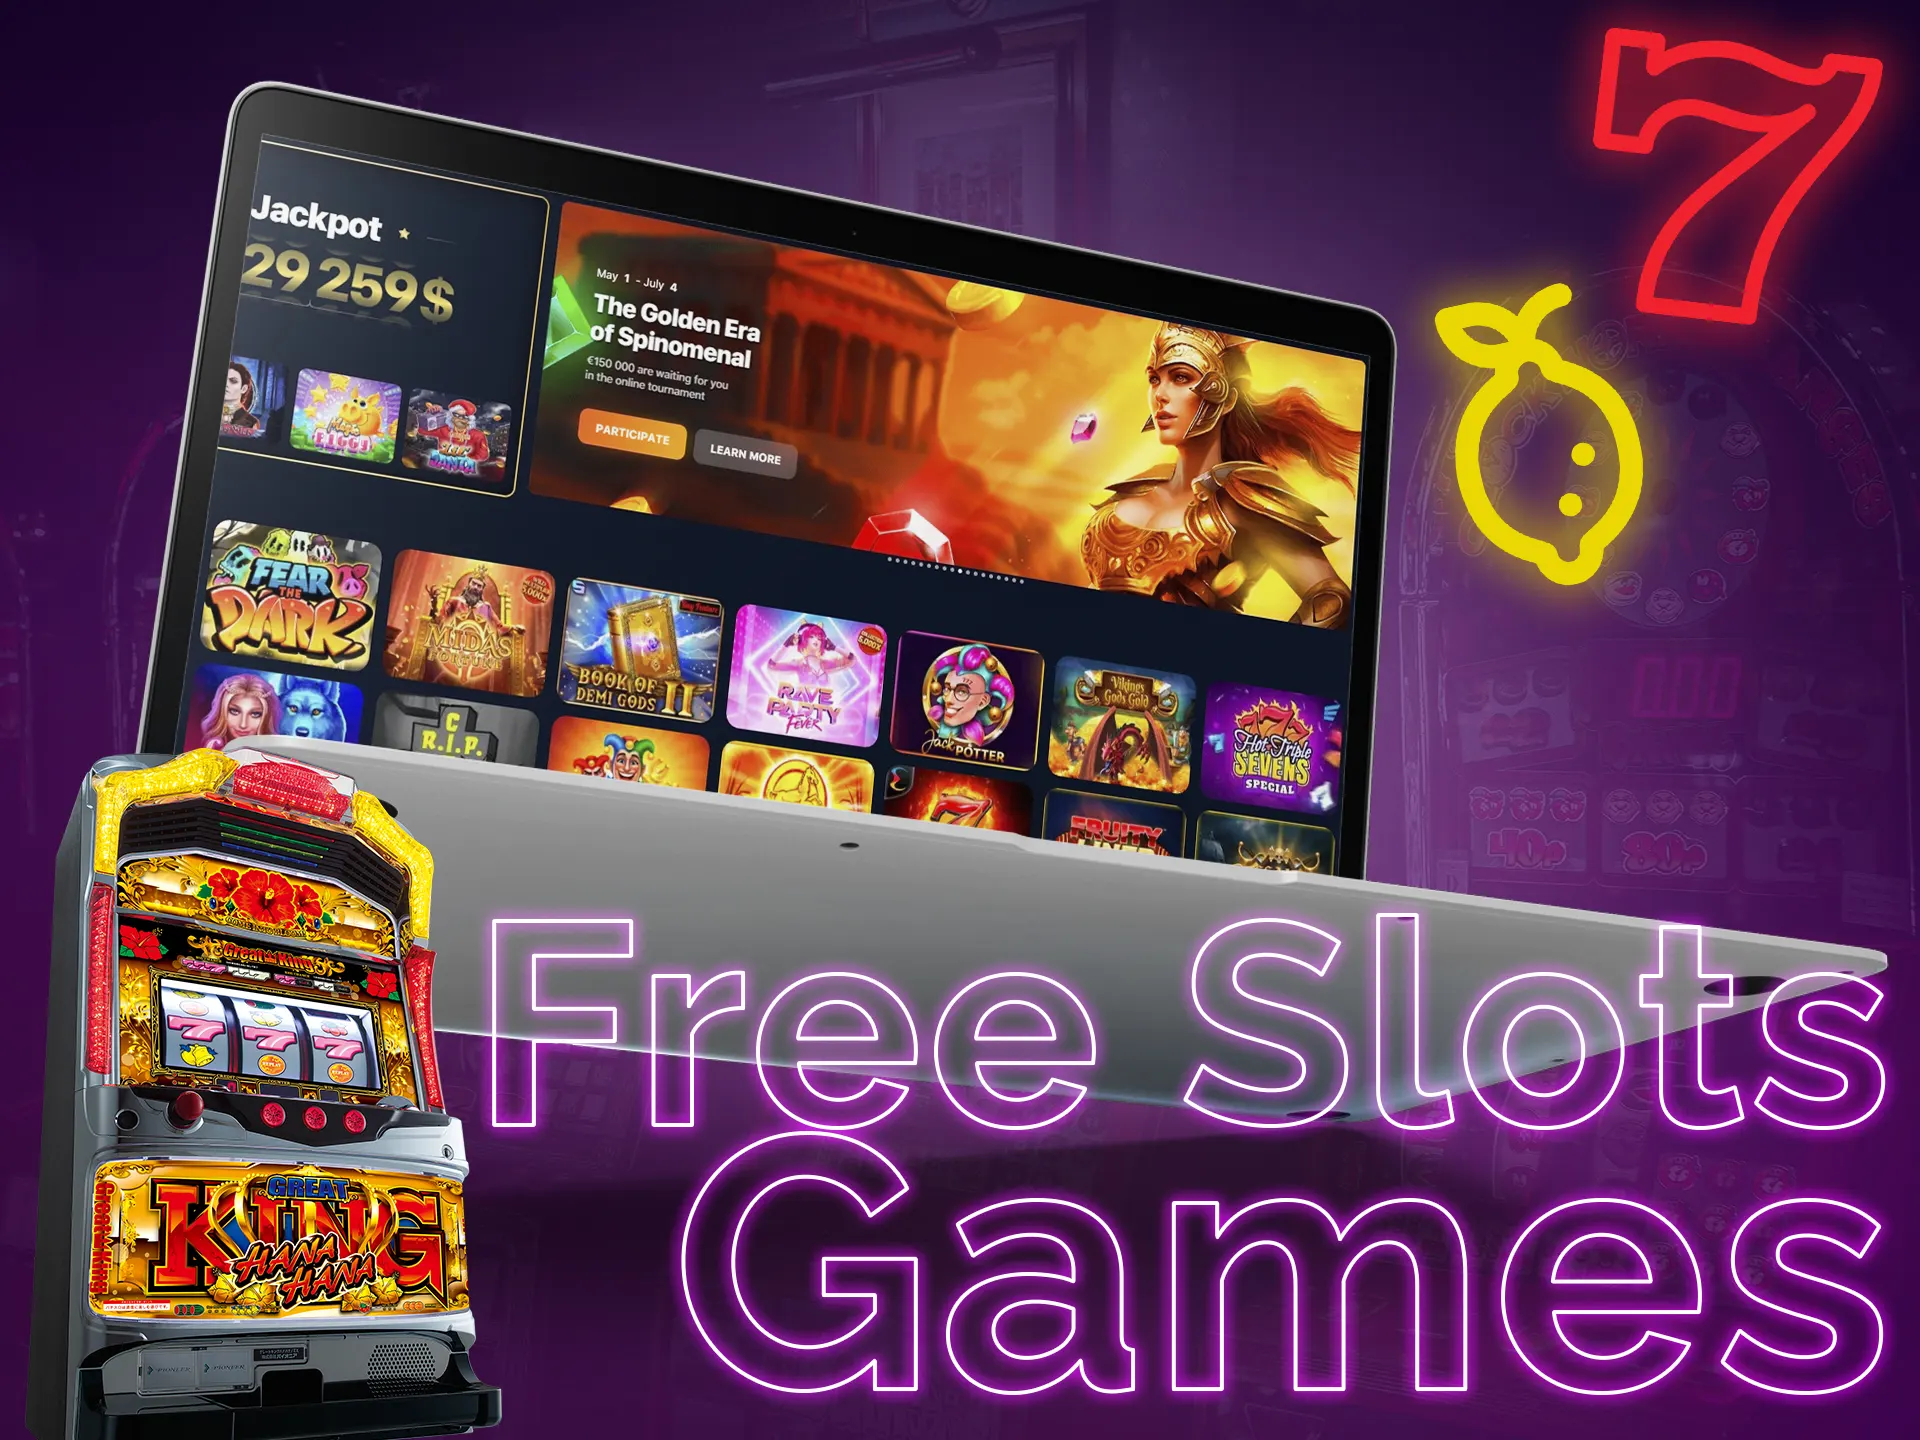 You can play casino games without the fear of losing real money.